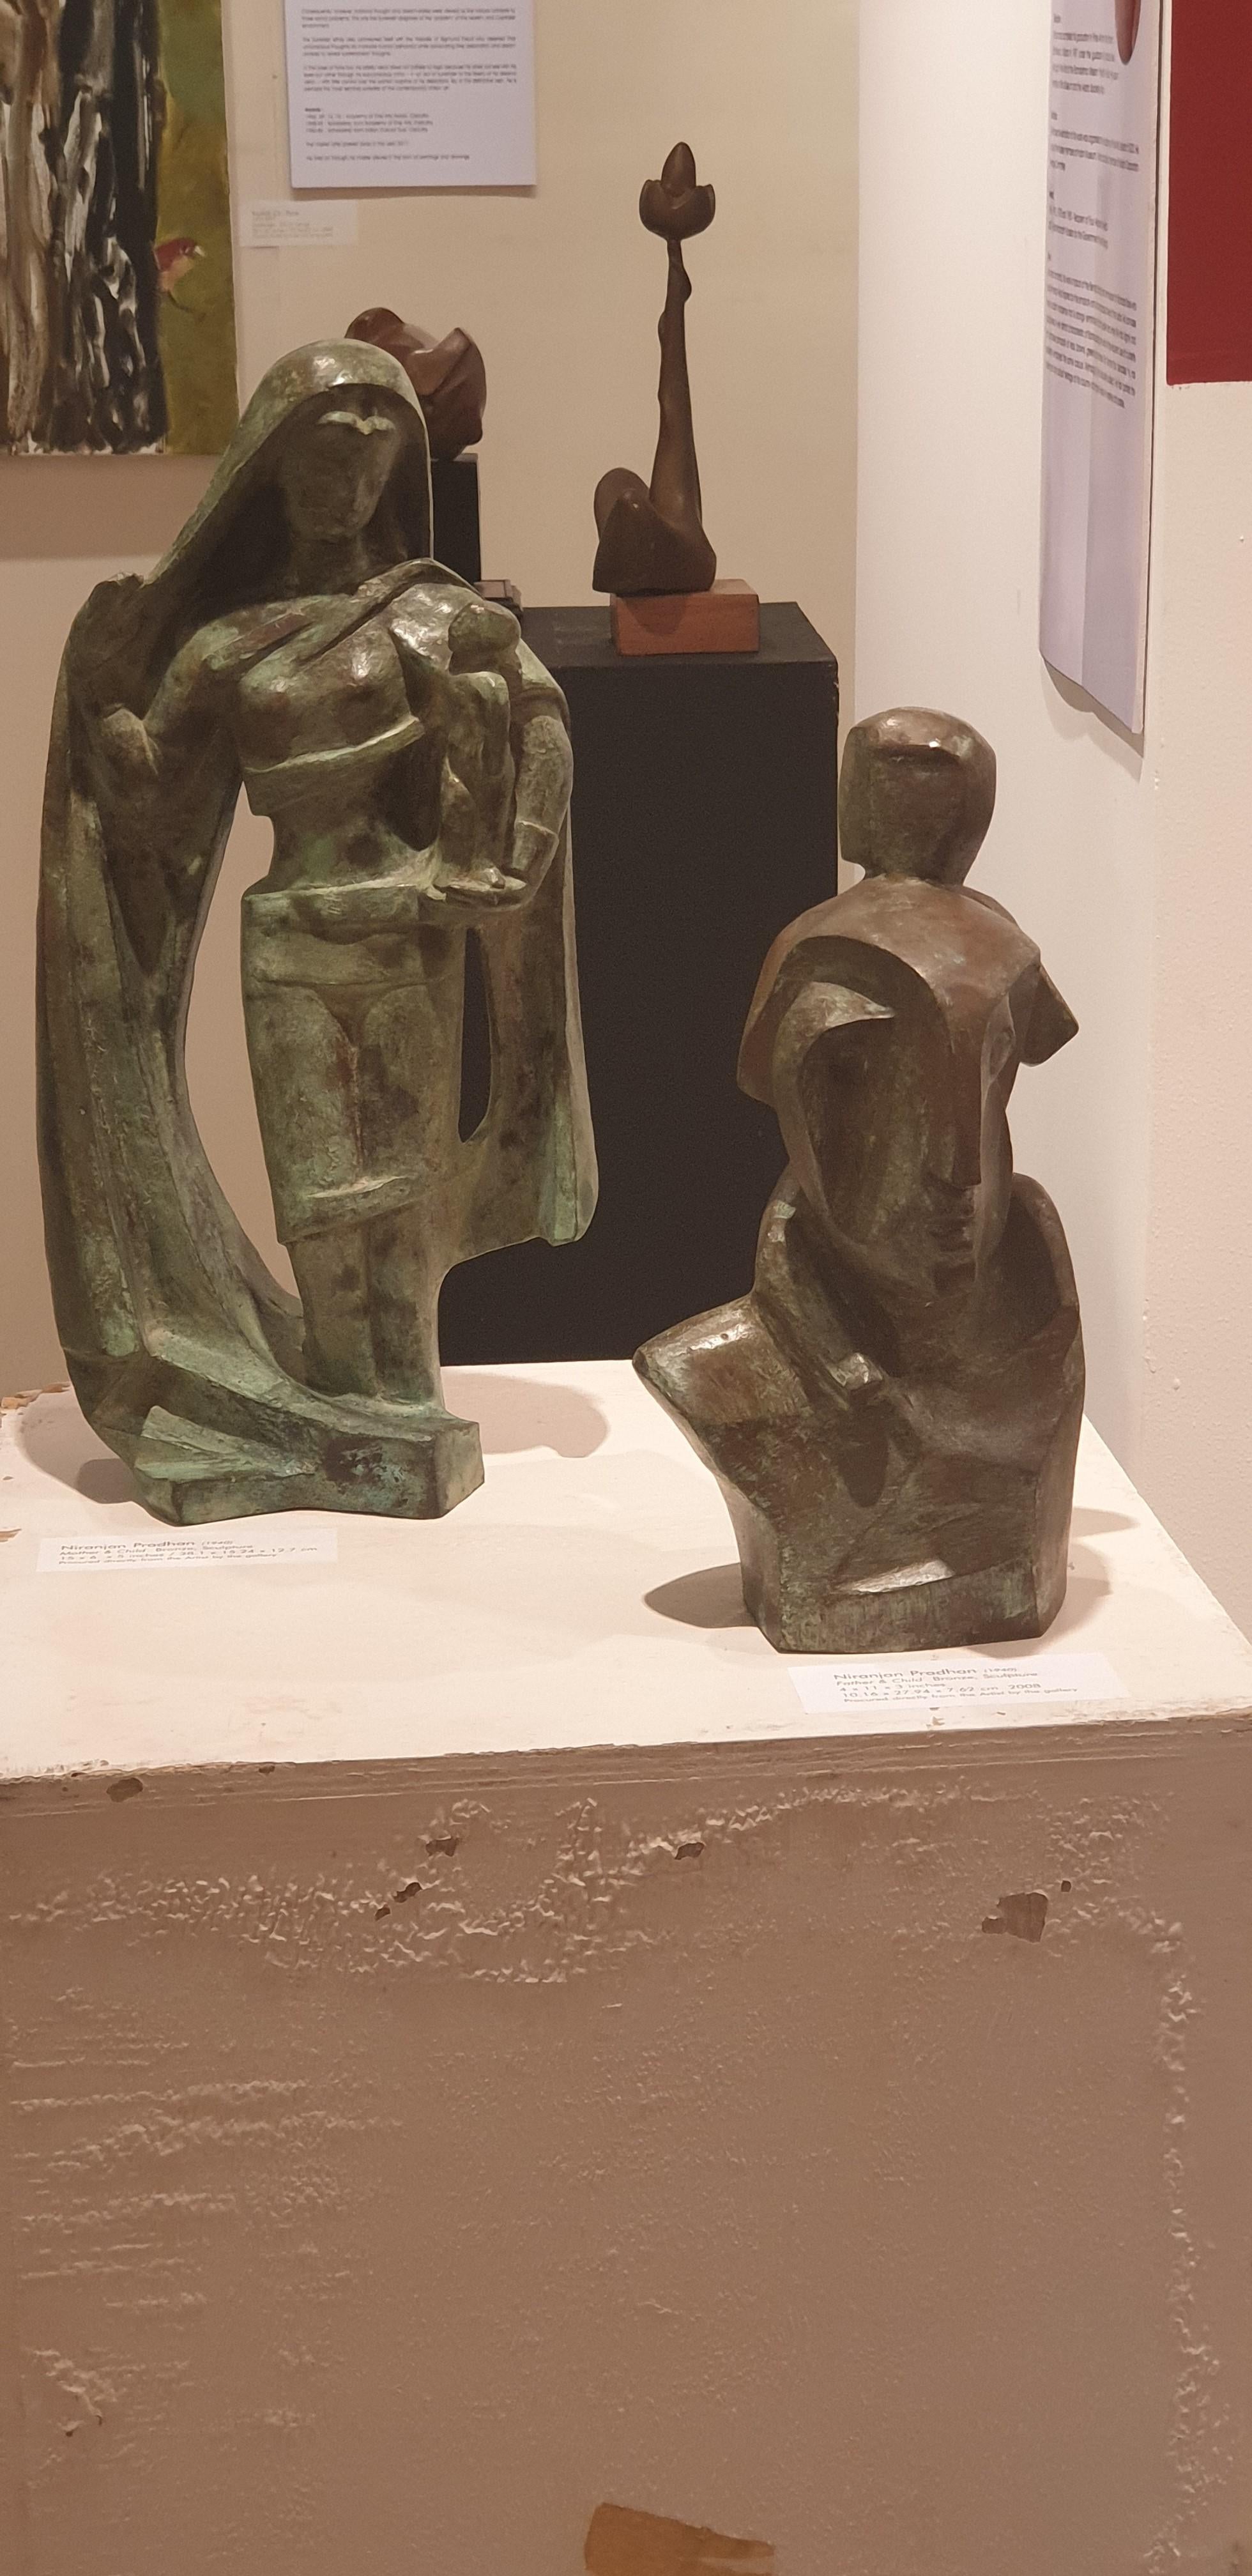 Niranjan Pradhan - Mother and Child - 15 x 5 x 4 inches 
Bronze sculpture

Style : Niranjan Pradhan emerged as an important sculptor from Calcutta, India in the late 1960s. His forms evolve from the inner core of life, from the environment around